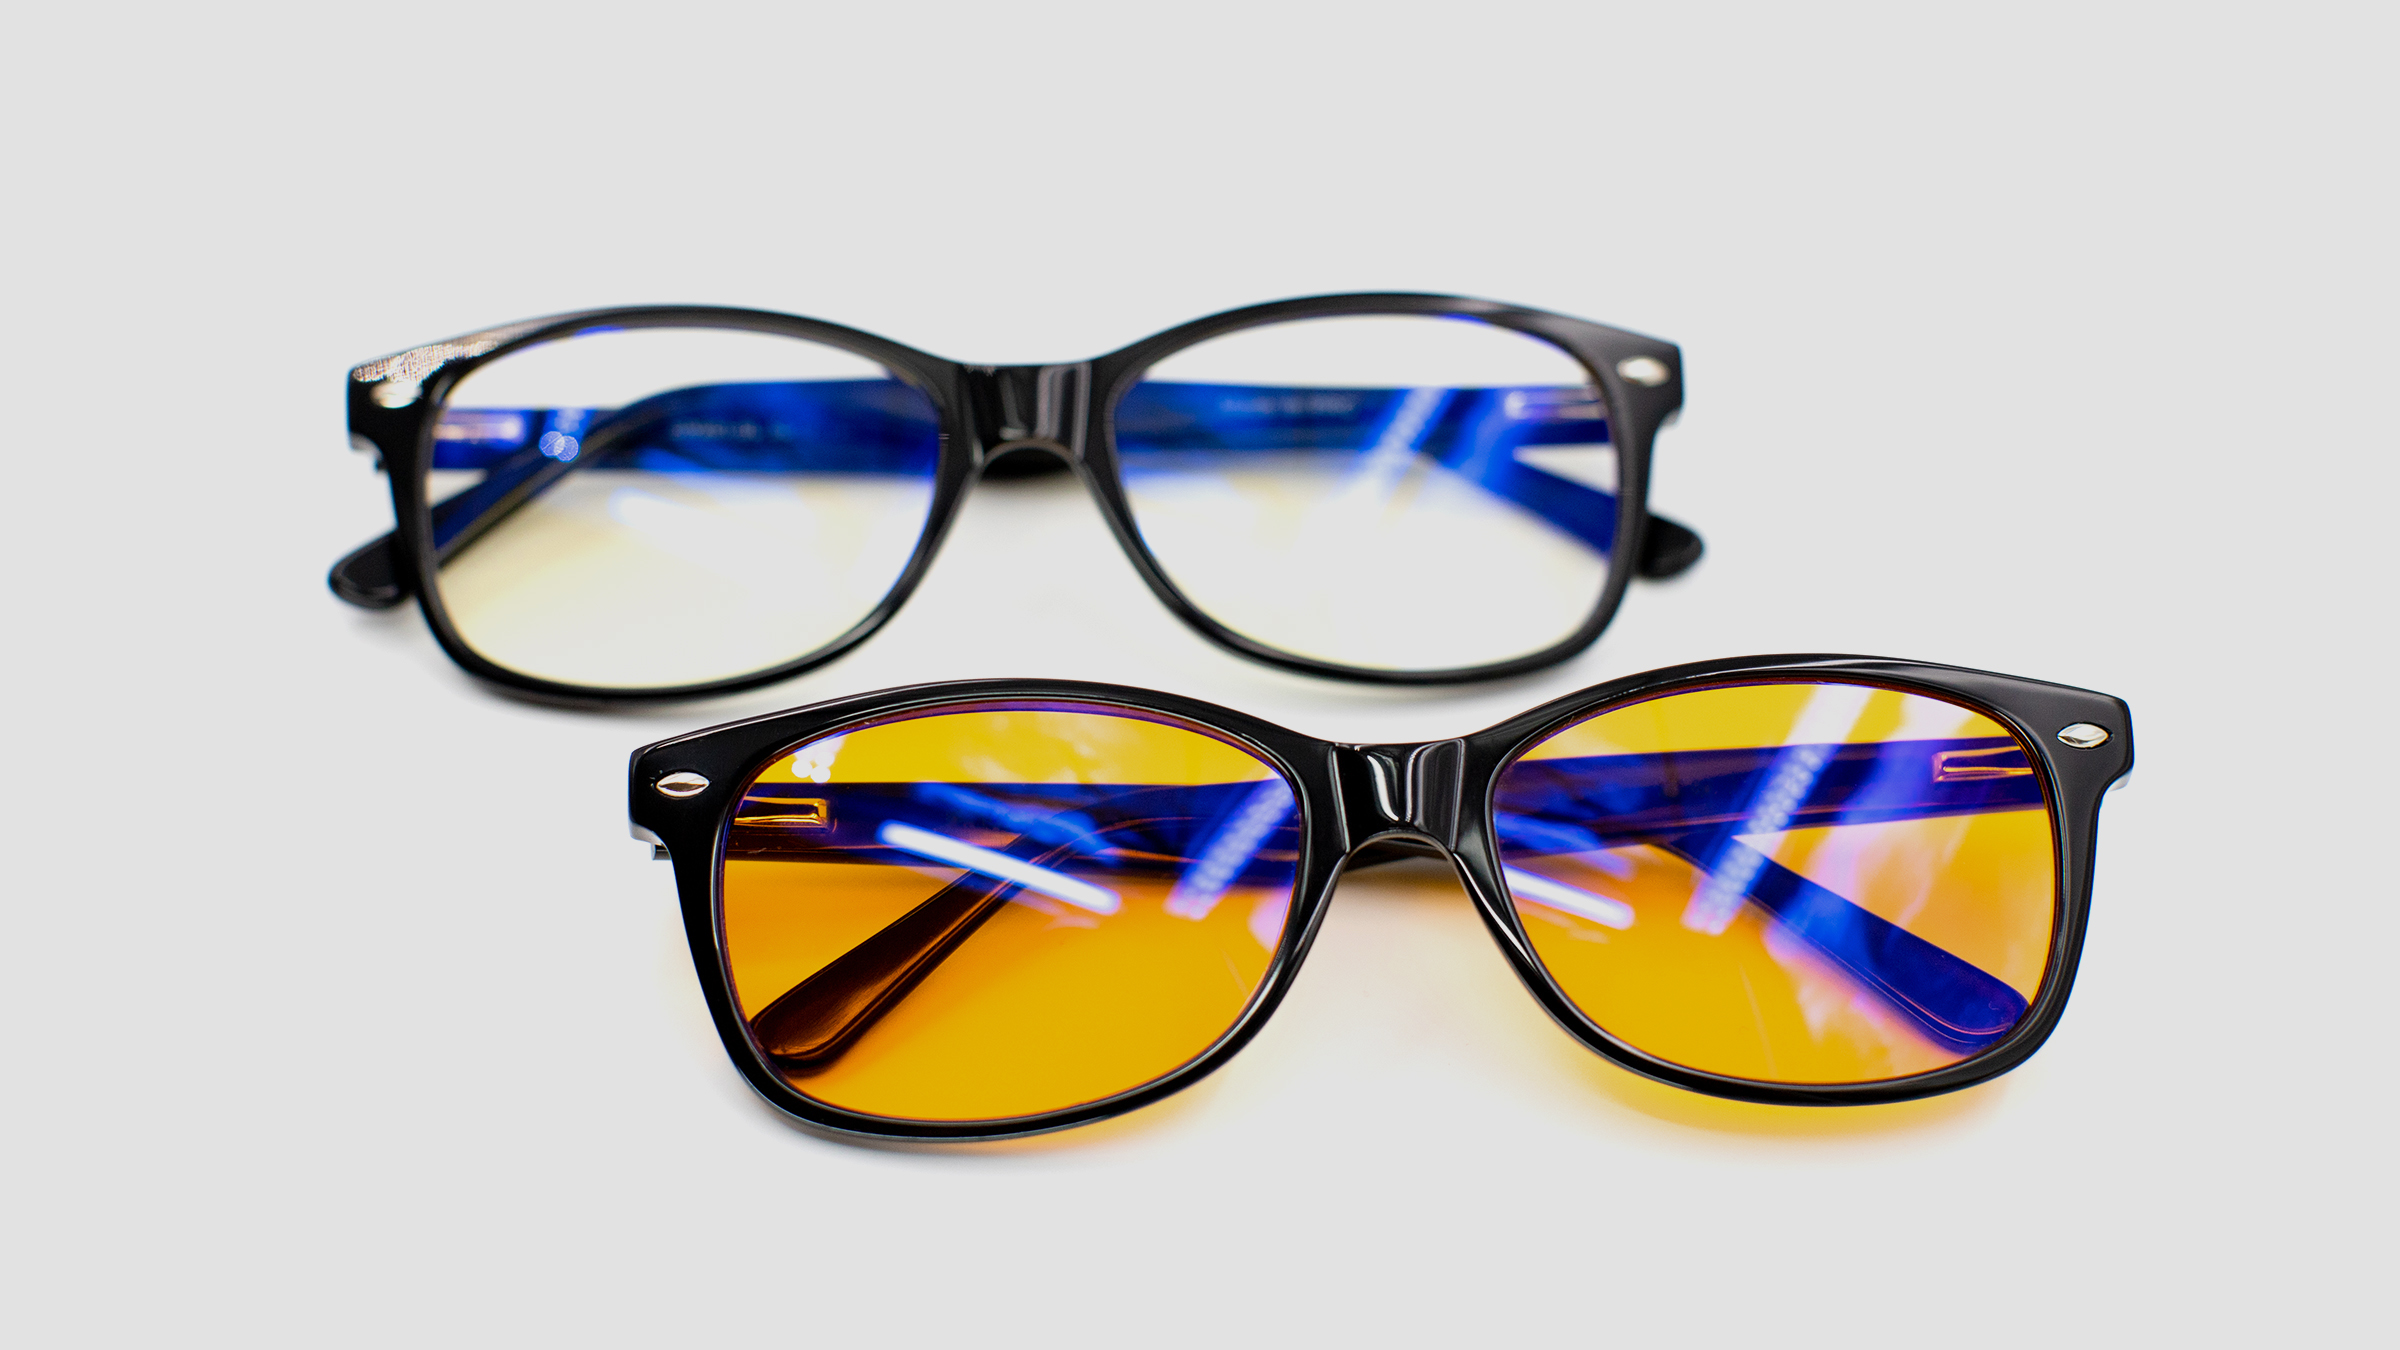 Top 3 Benefits of Blue-Screen/Blue-Light Glasses, For Eyes